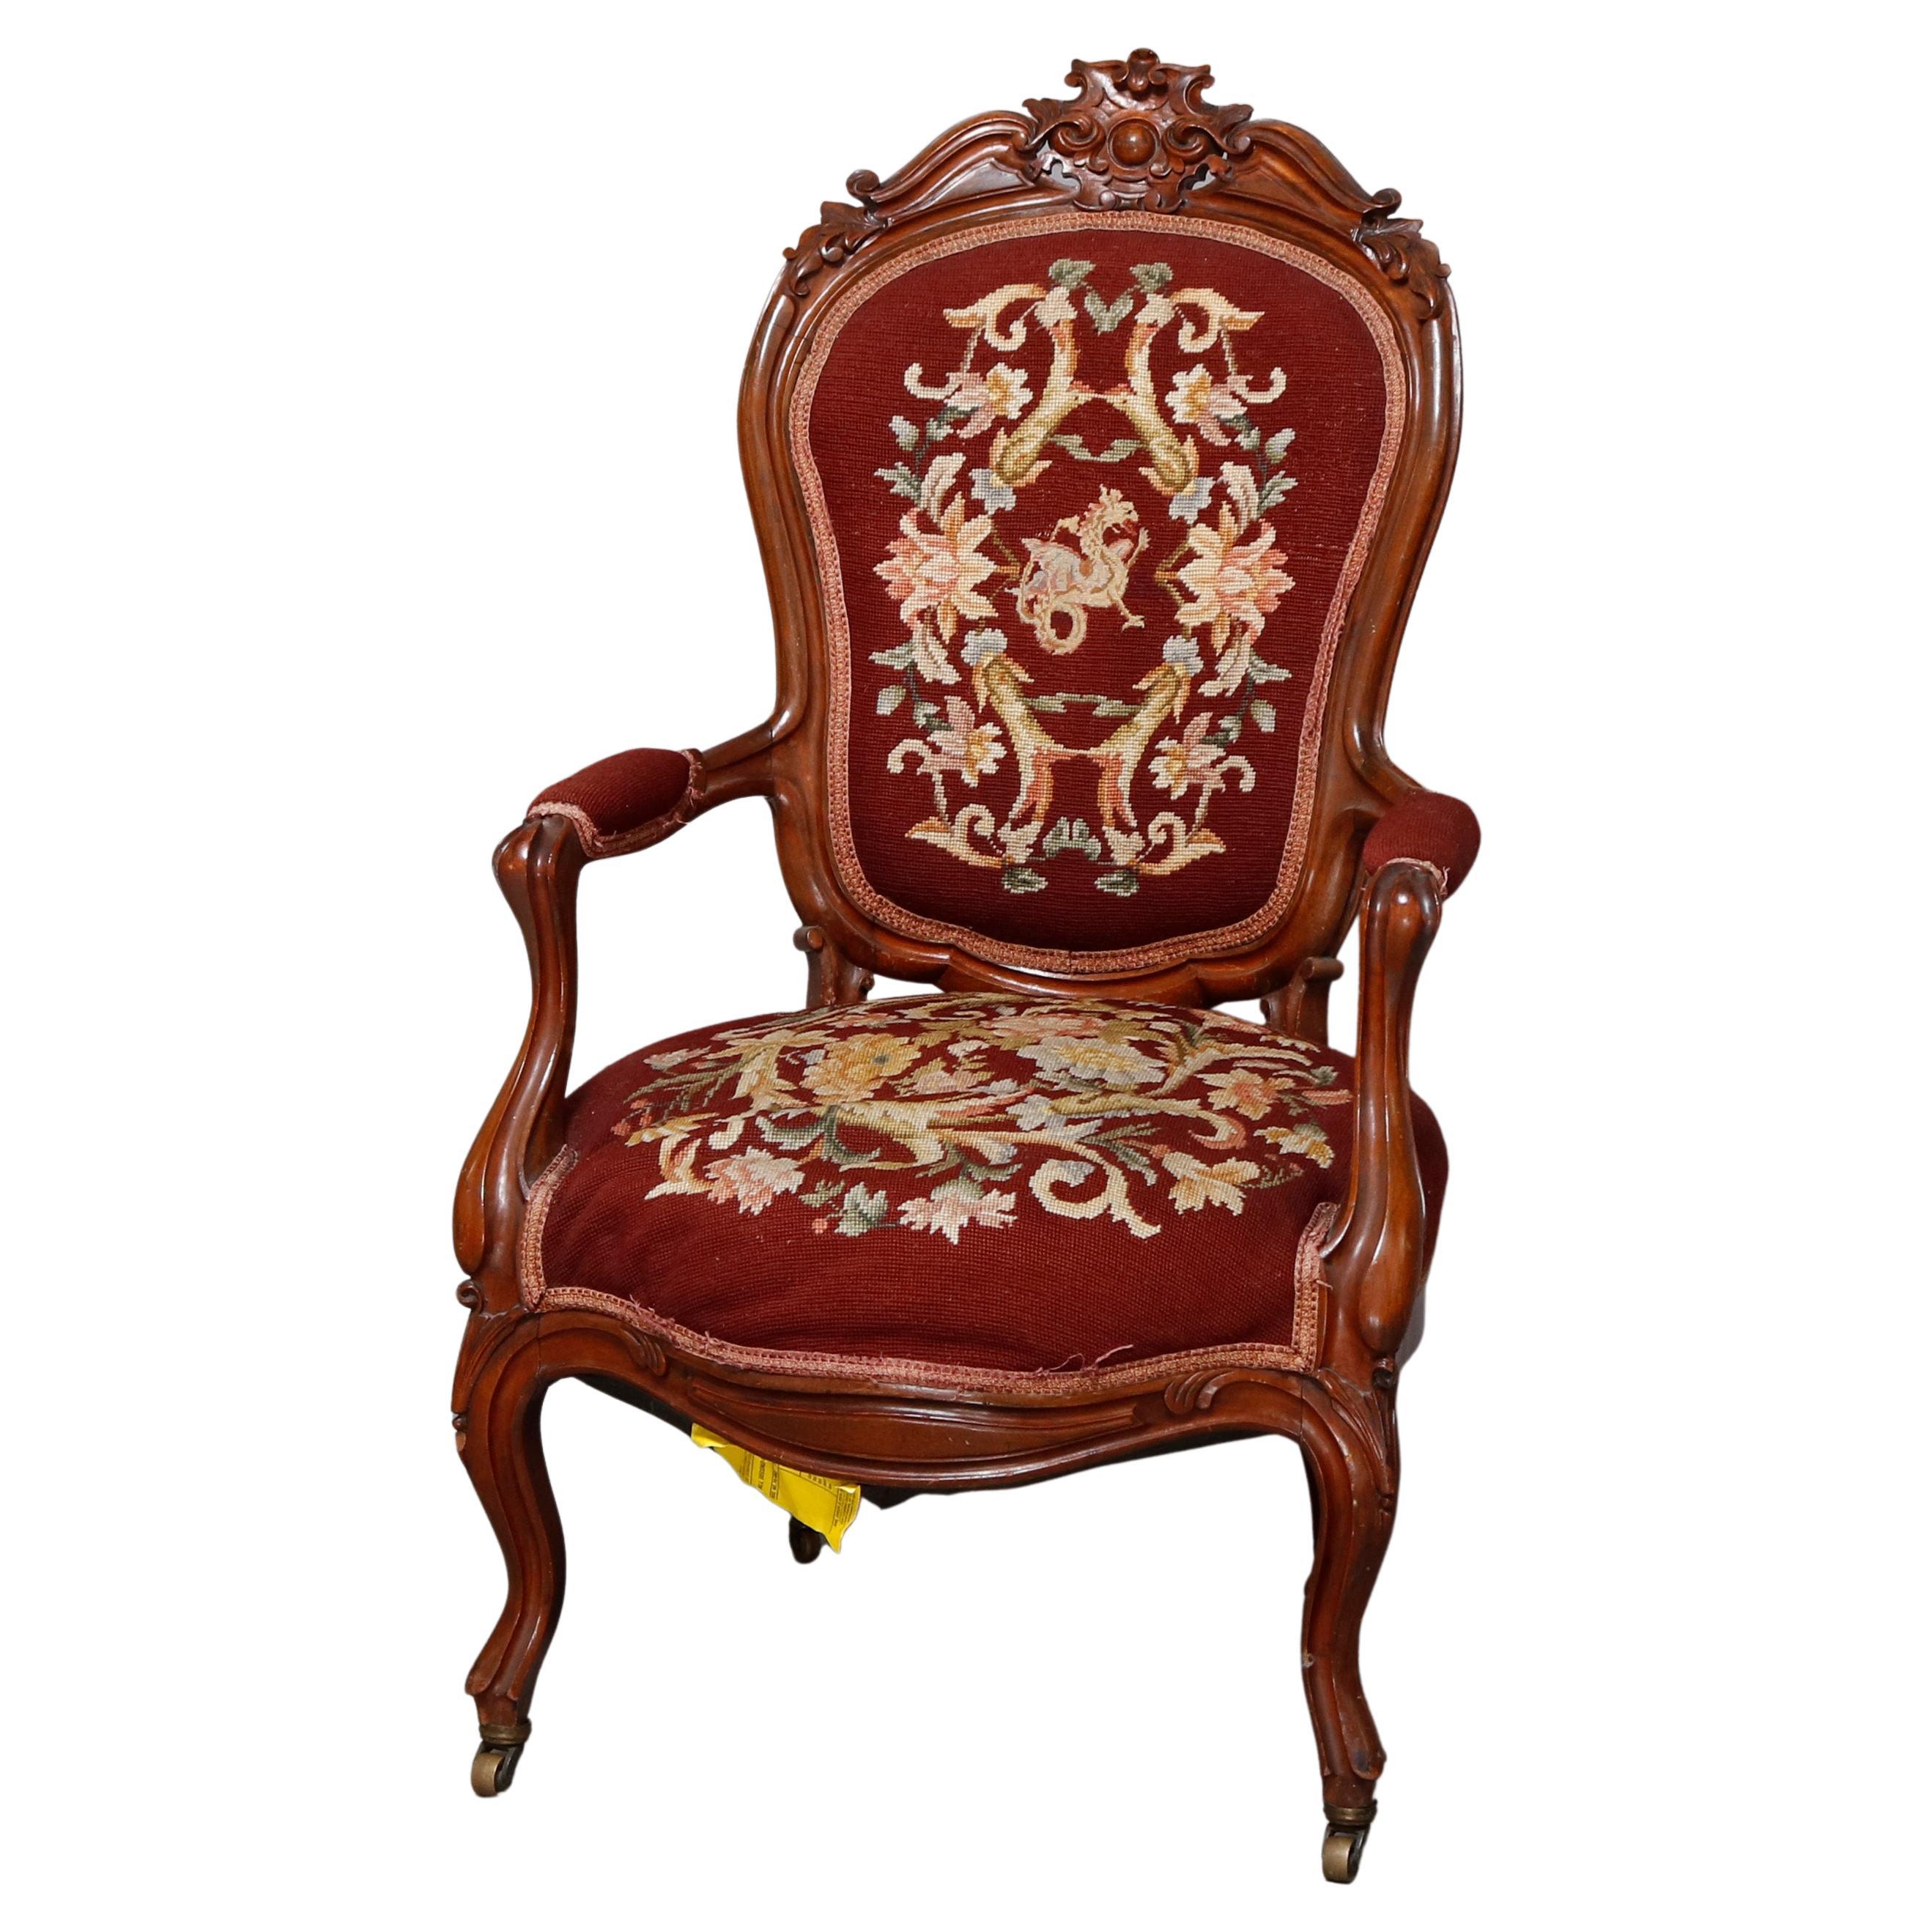 Antique Victorian Carved Rosewood Needlepoint Gentleman's Parlor Armchair